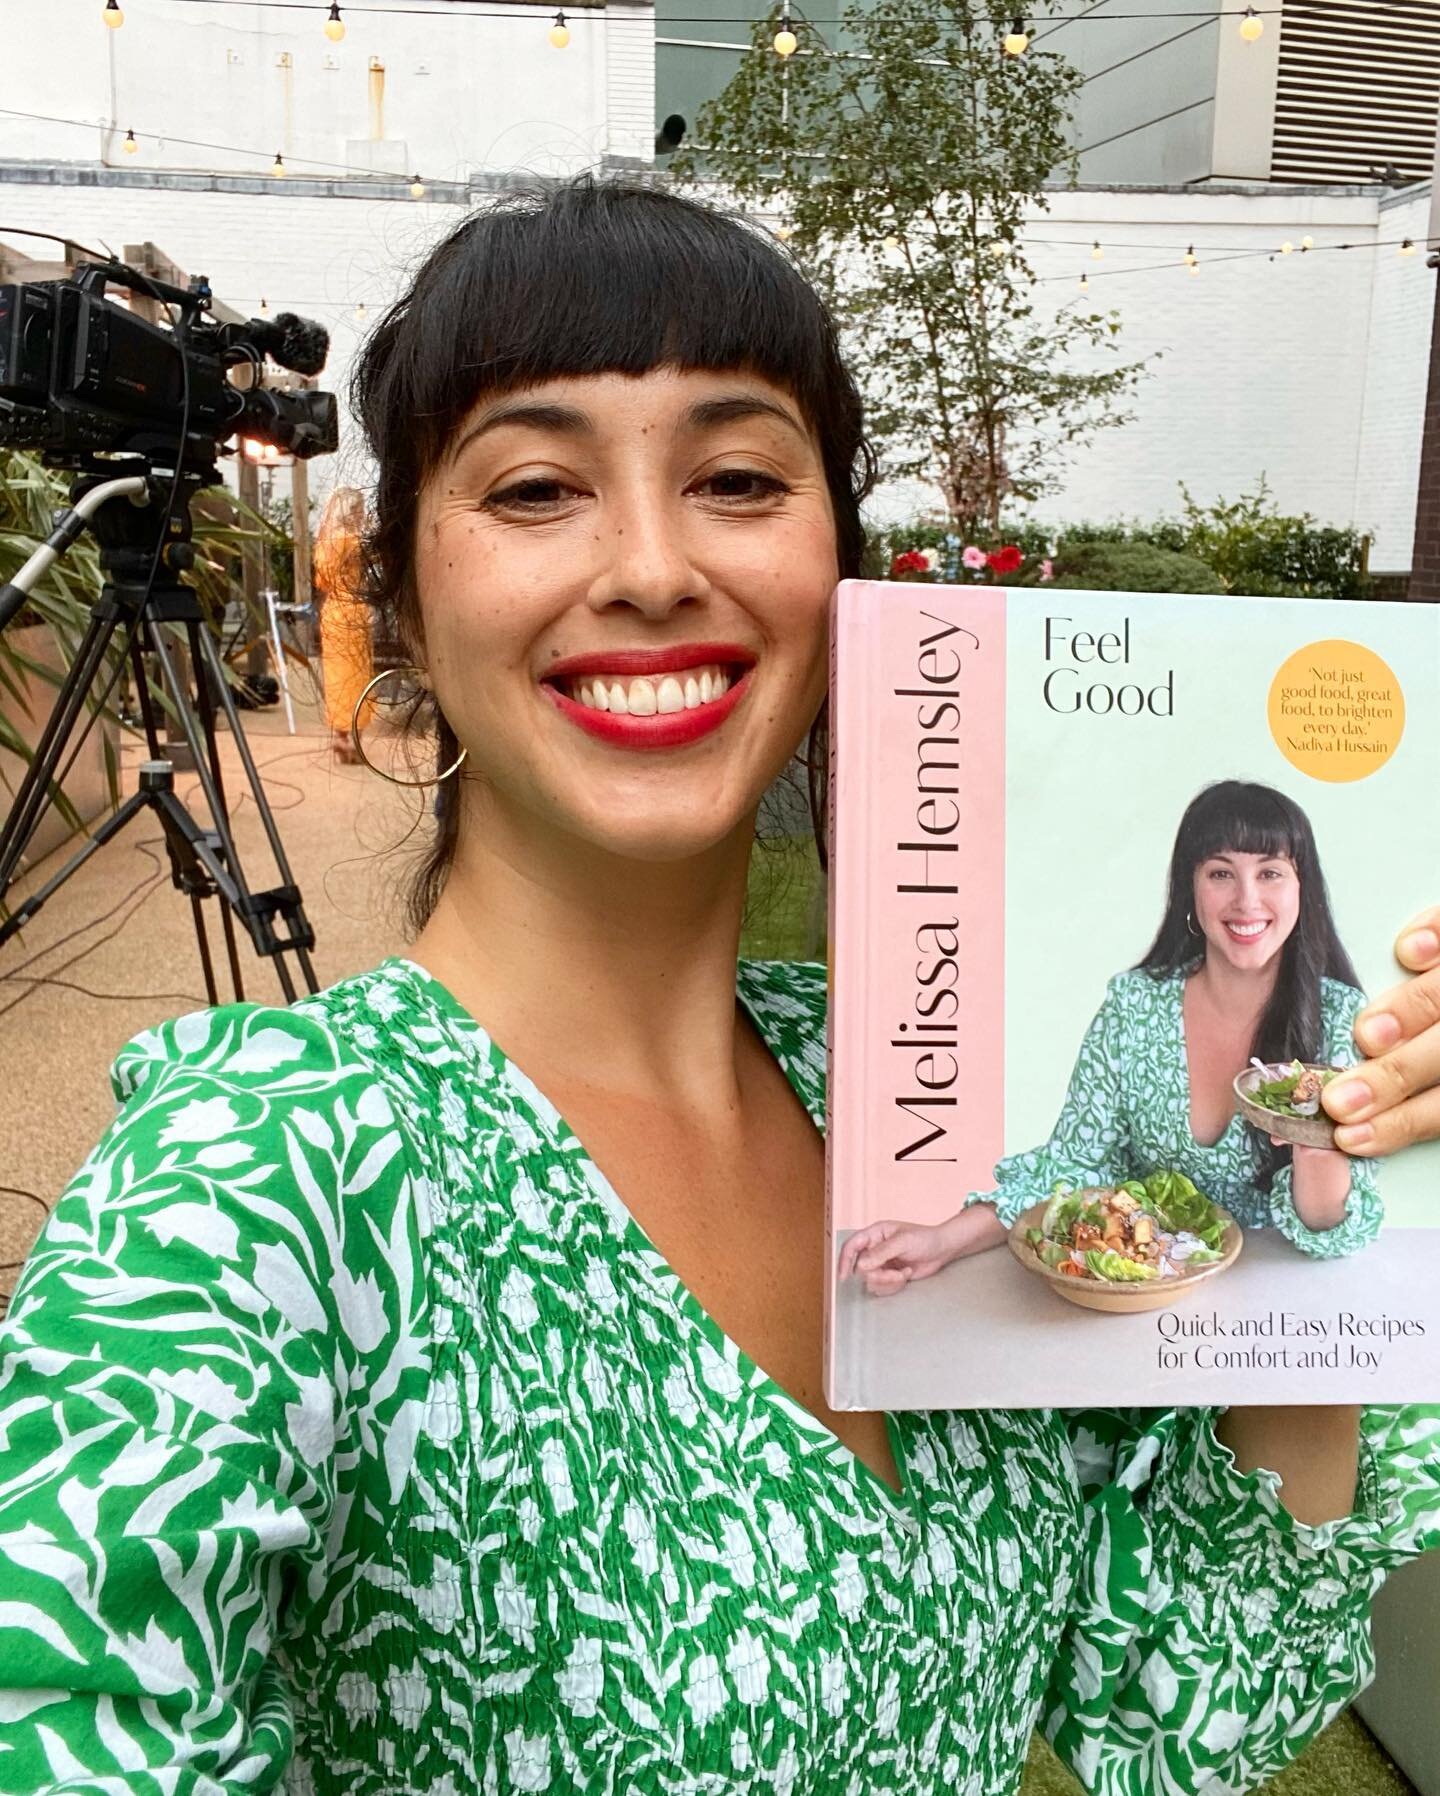 London, UK. 25th Feb 2019. Melissa Hemsley, chefs and influencers